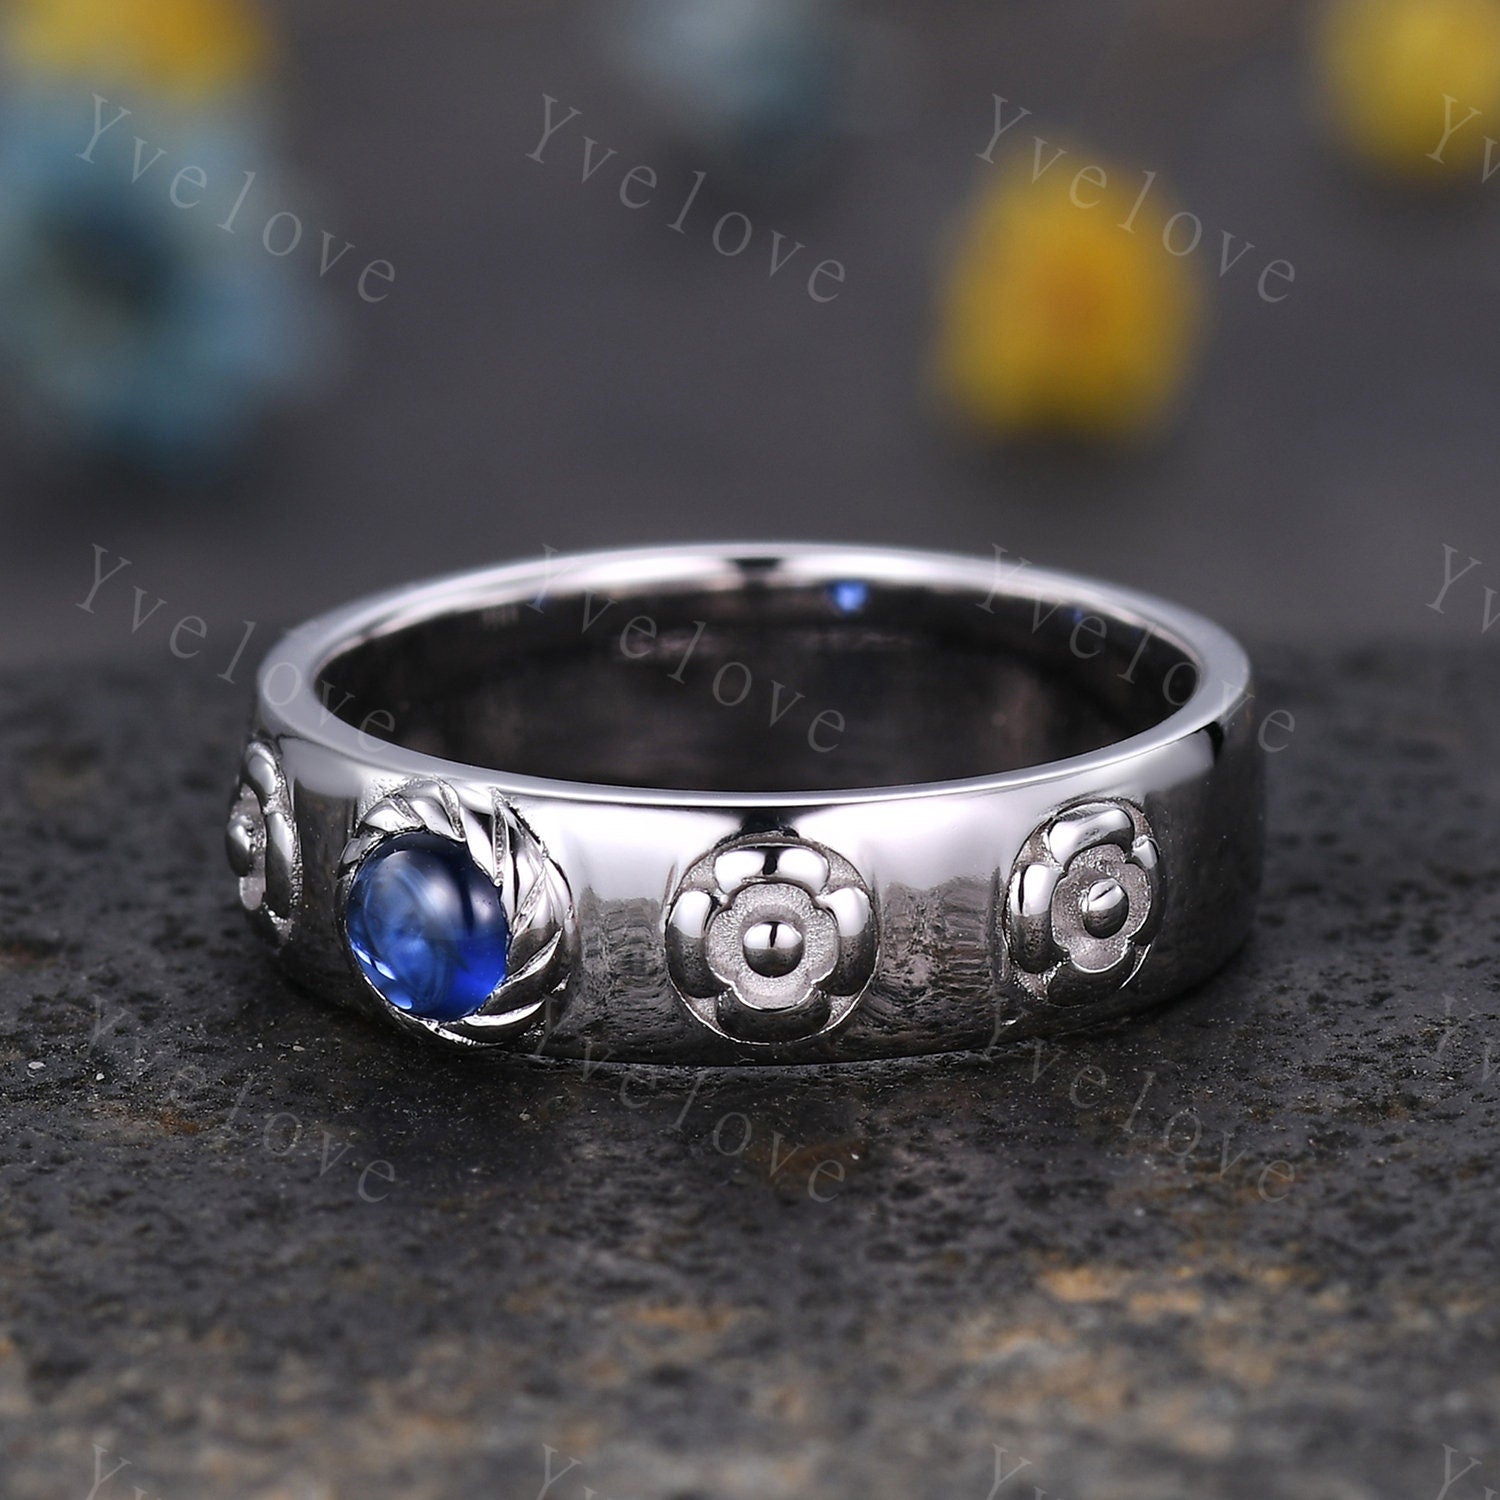 Howls Moving Castle Ring 4mm Round Natural Blue Sapphire Wedding Band S925 Silver Ring Howl's Ring Sophie's Ring Stacking Matching Band Gift White